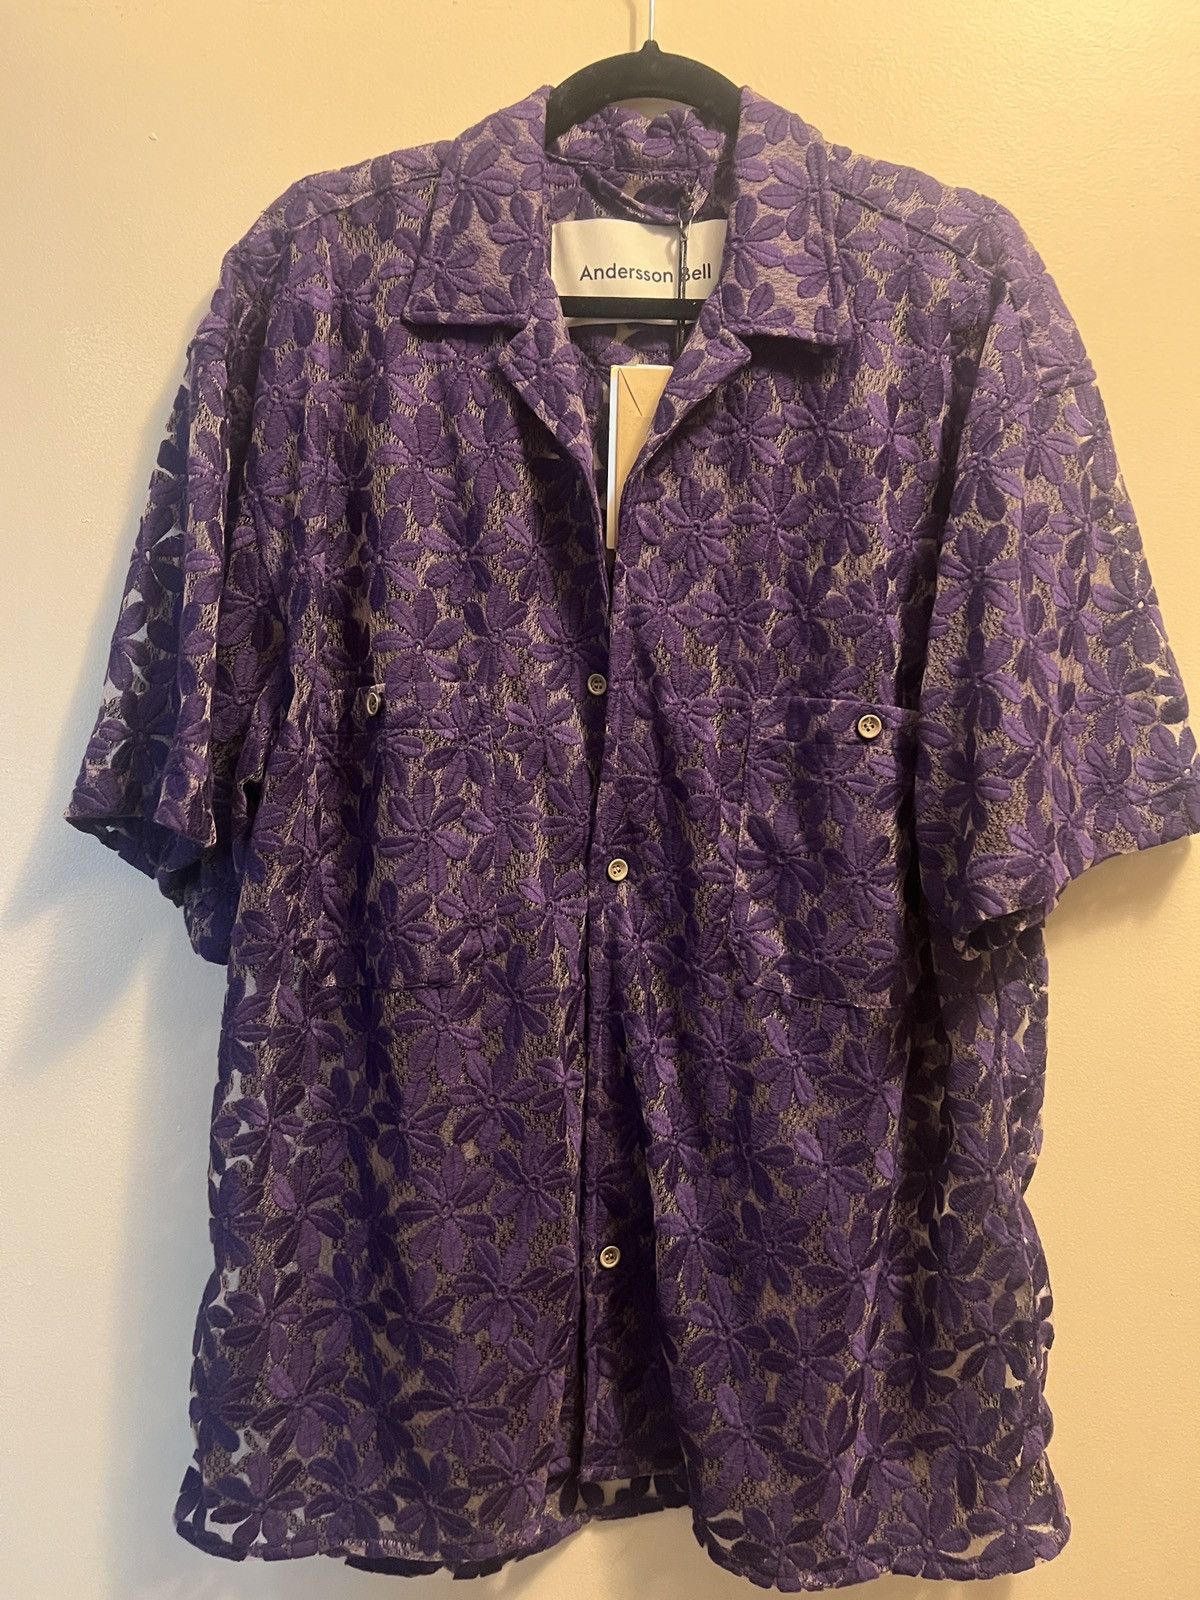 Andersson Bell Andersson Bell Flower Sheer Open Collar Shirt in Lilac Med |  Grailed